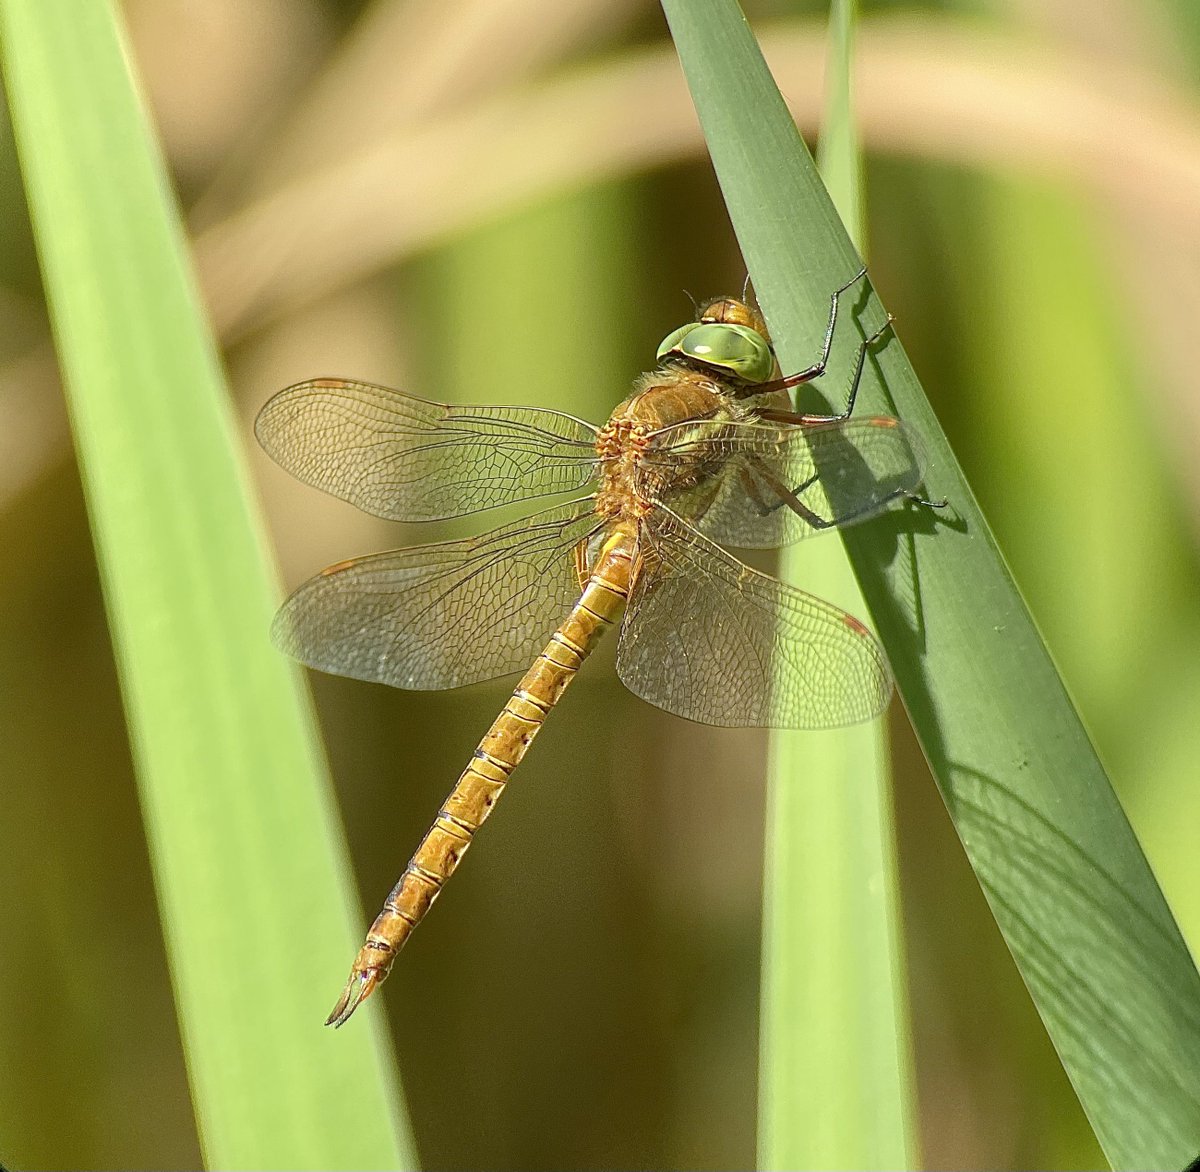 At least 7 Norfolk Hawkers at Radipole this afternoon